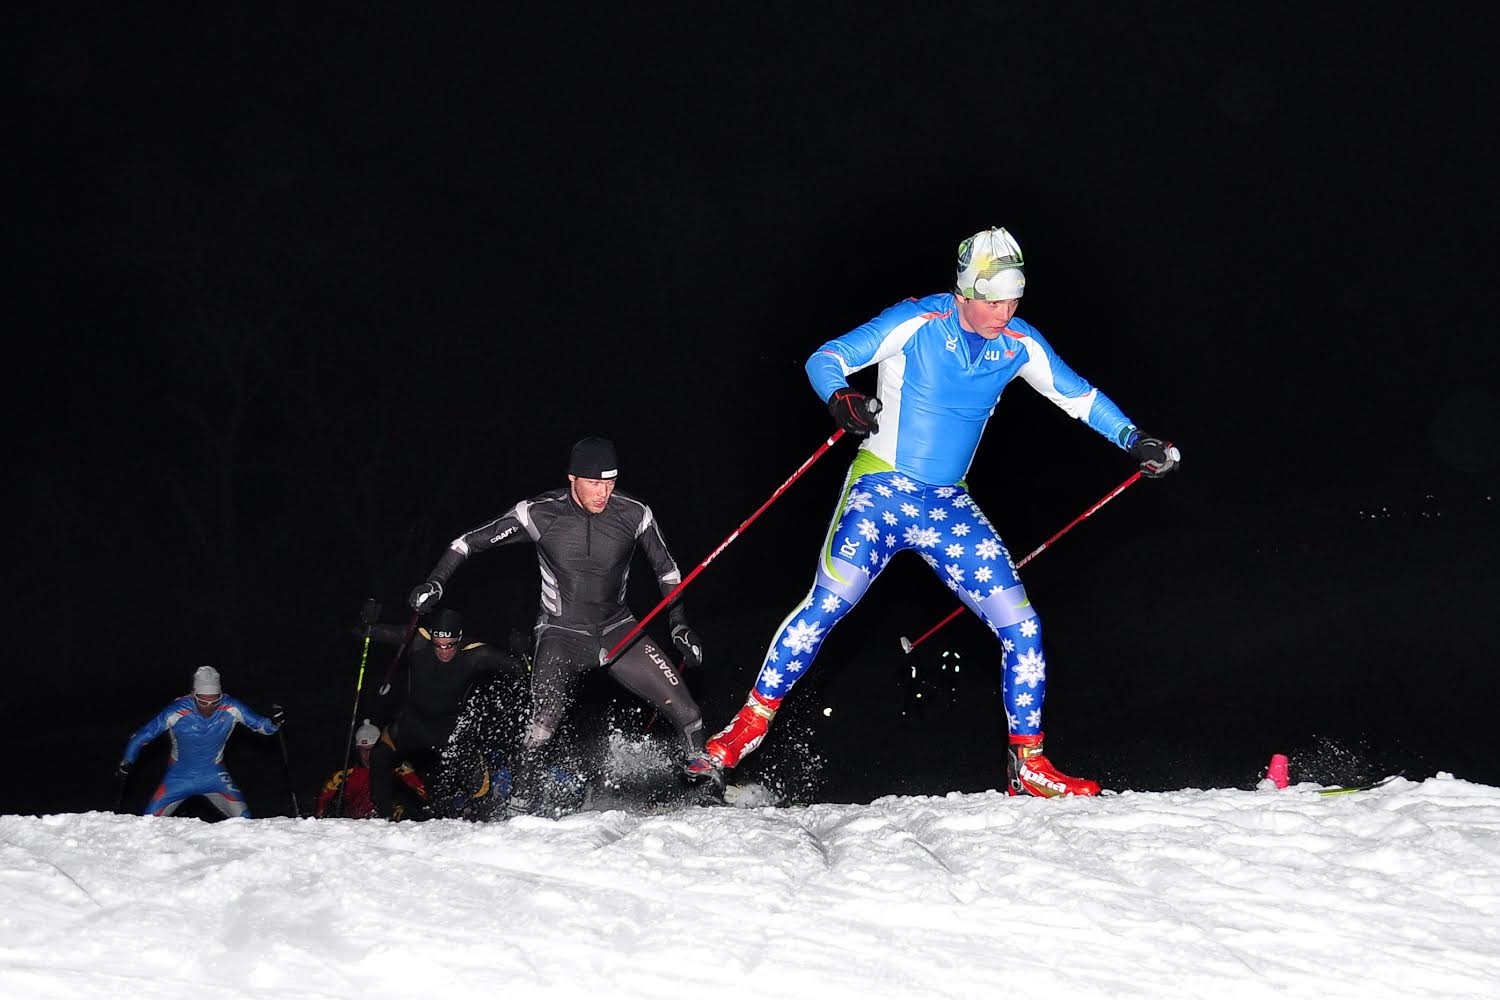 Skiing in the Dark: After Disconnect, Weston Works to Get Lights Back On